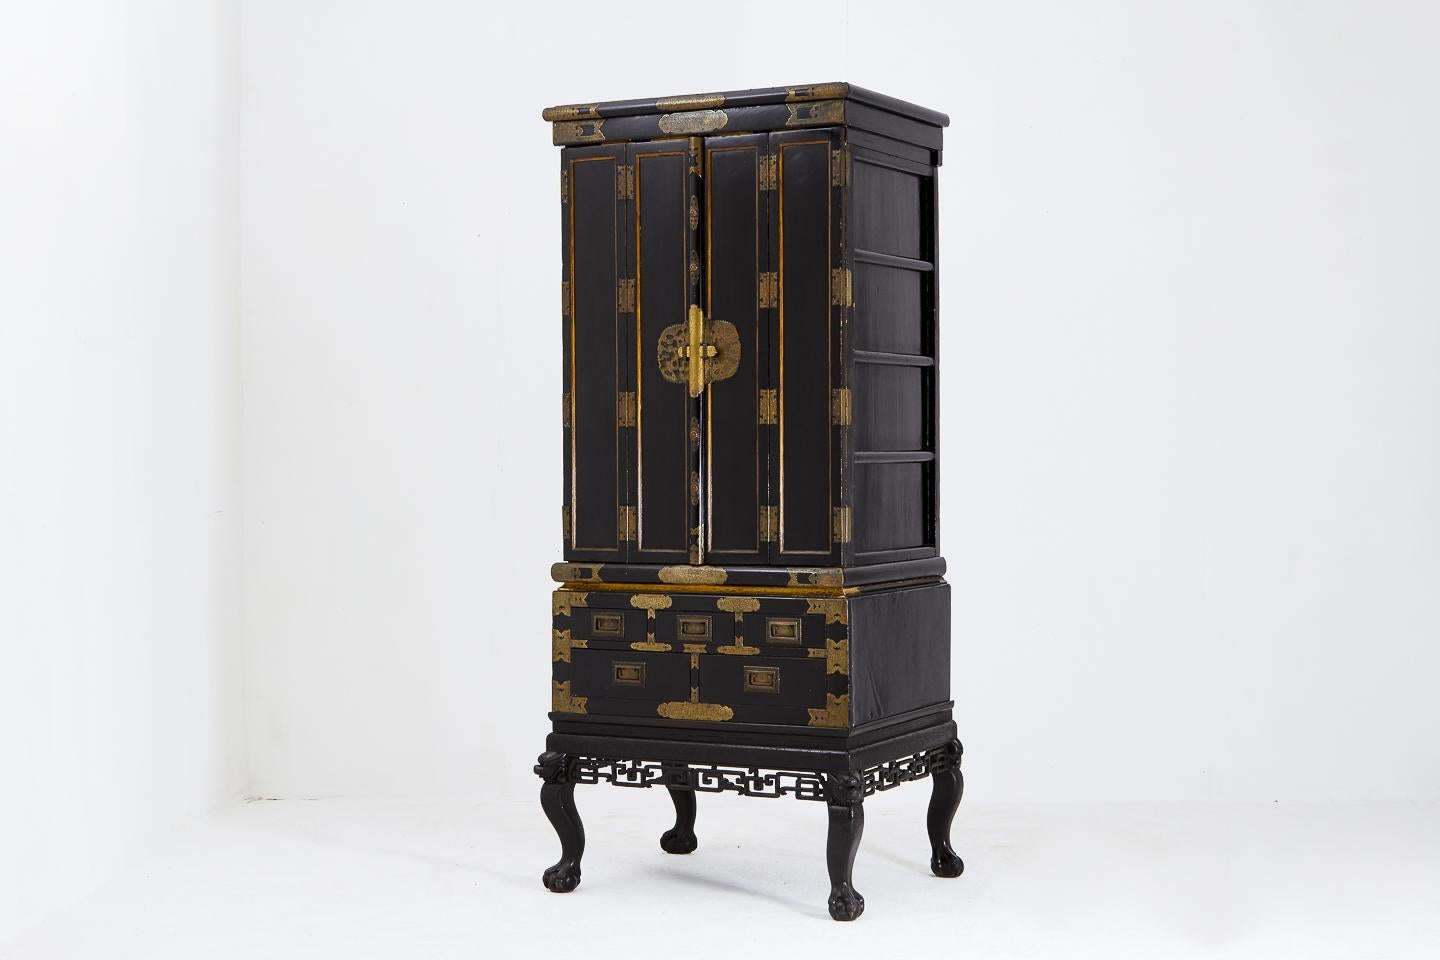 Wonderful example of a late 19th century Japanese black lacquer Butsudan cabinet with engraved brass mounts and giltwood interior.

A real statement piece of furniture.